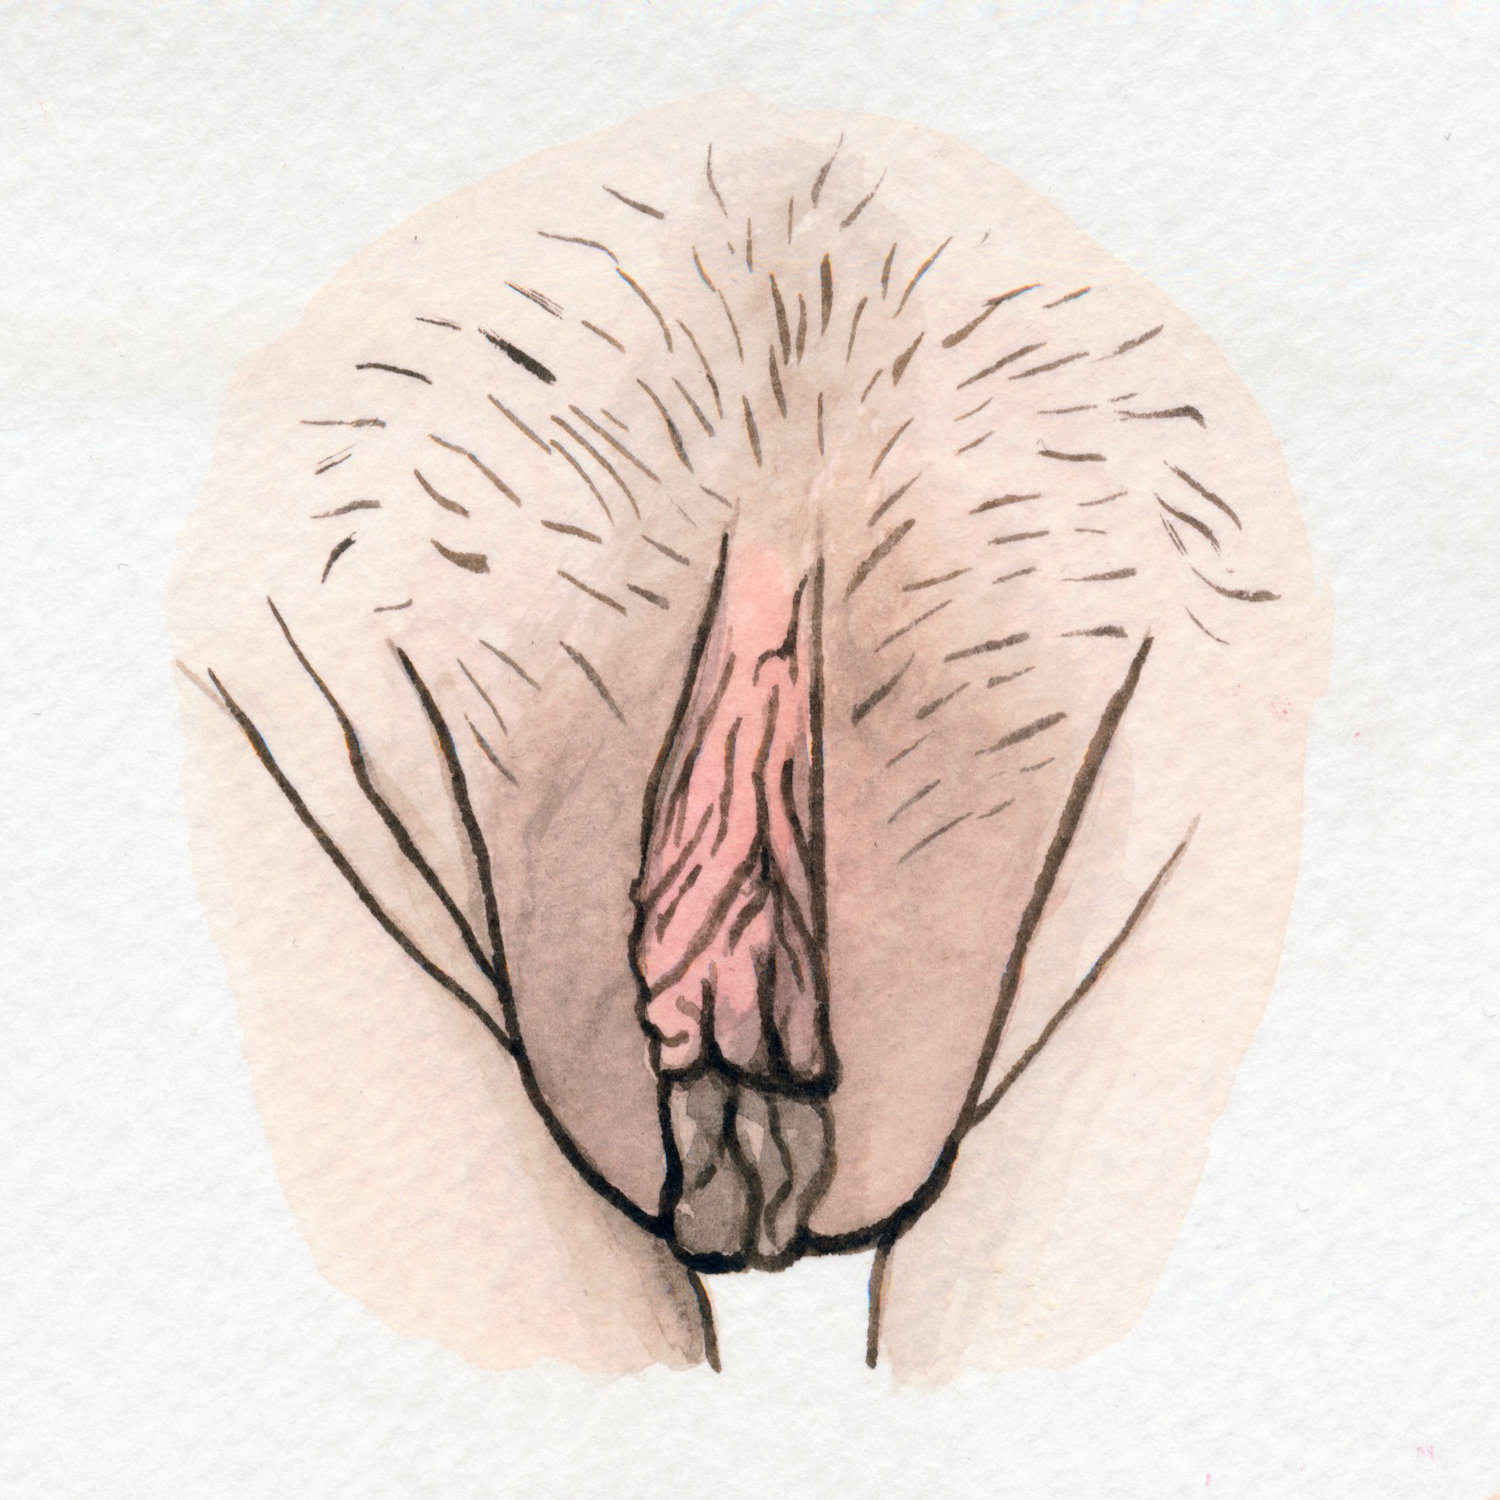 I THINK IT'S ADORABLE - The Vulva Gallery.